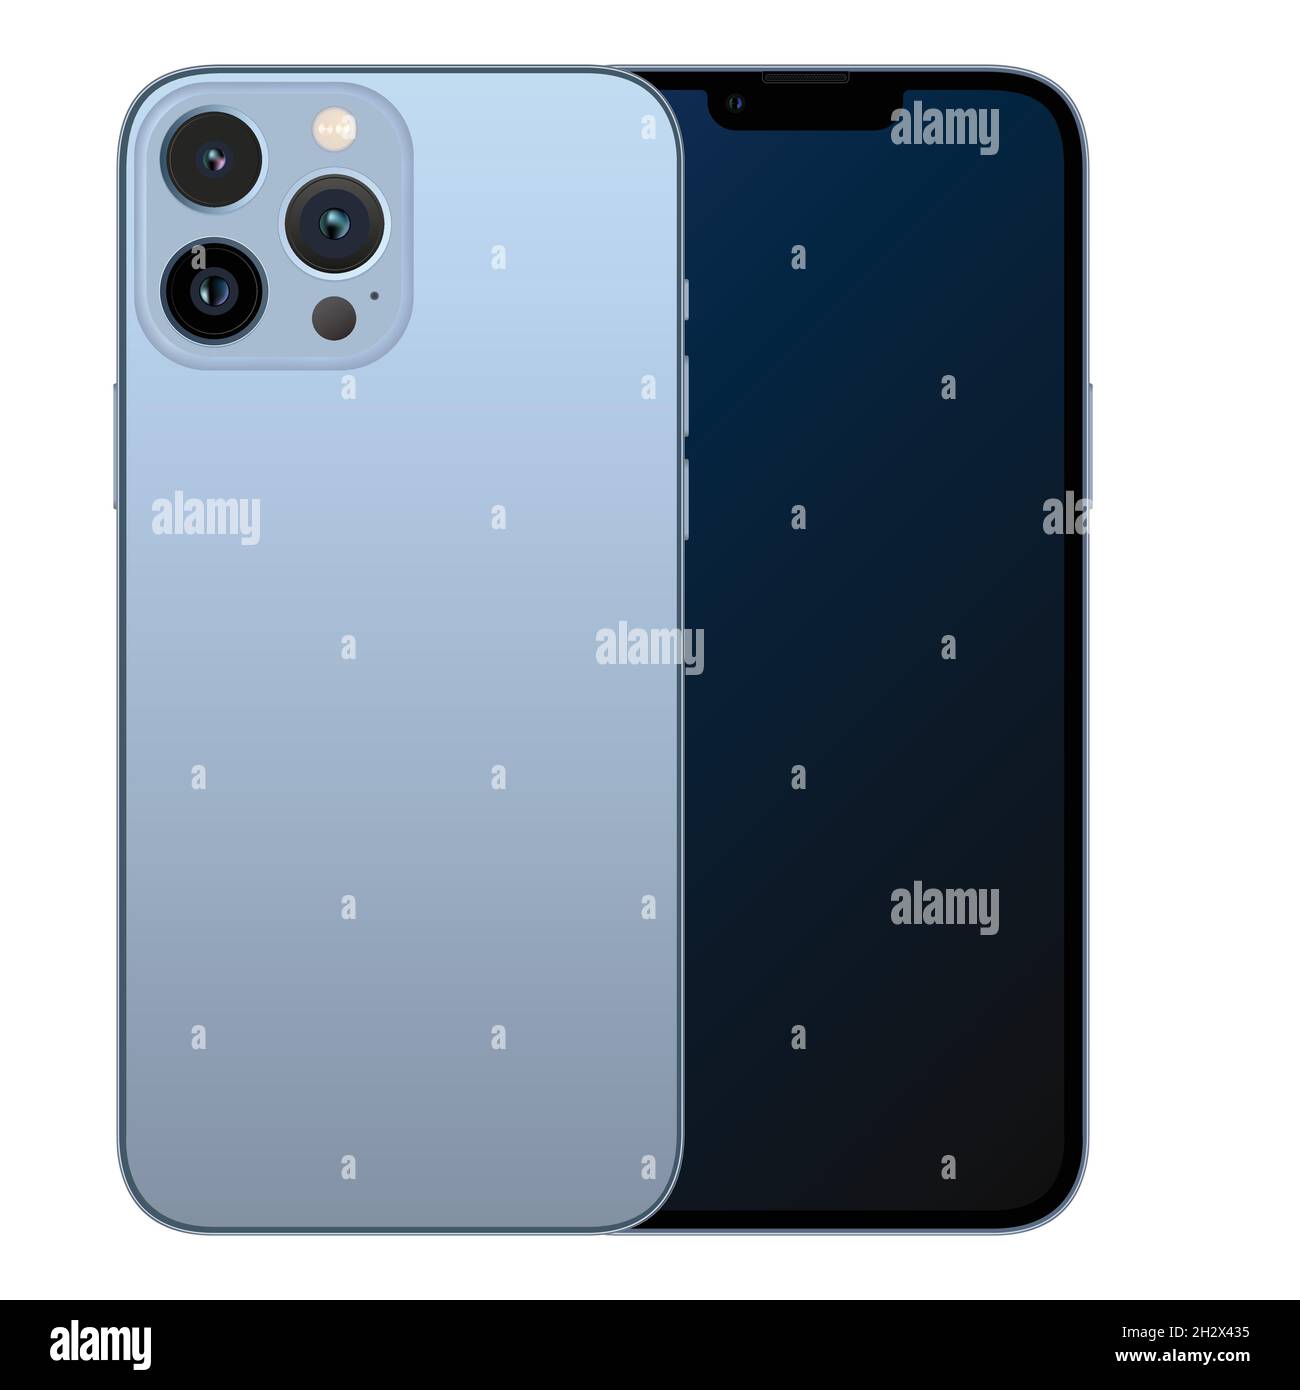 New model iphone 13 pro max sierra blue, front and back design smartphone, flat design mobile phone vector stock illustration Stock Vector